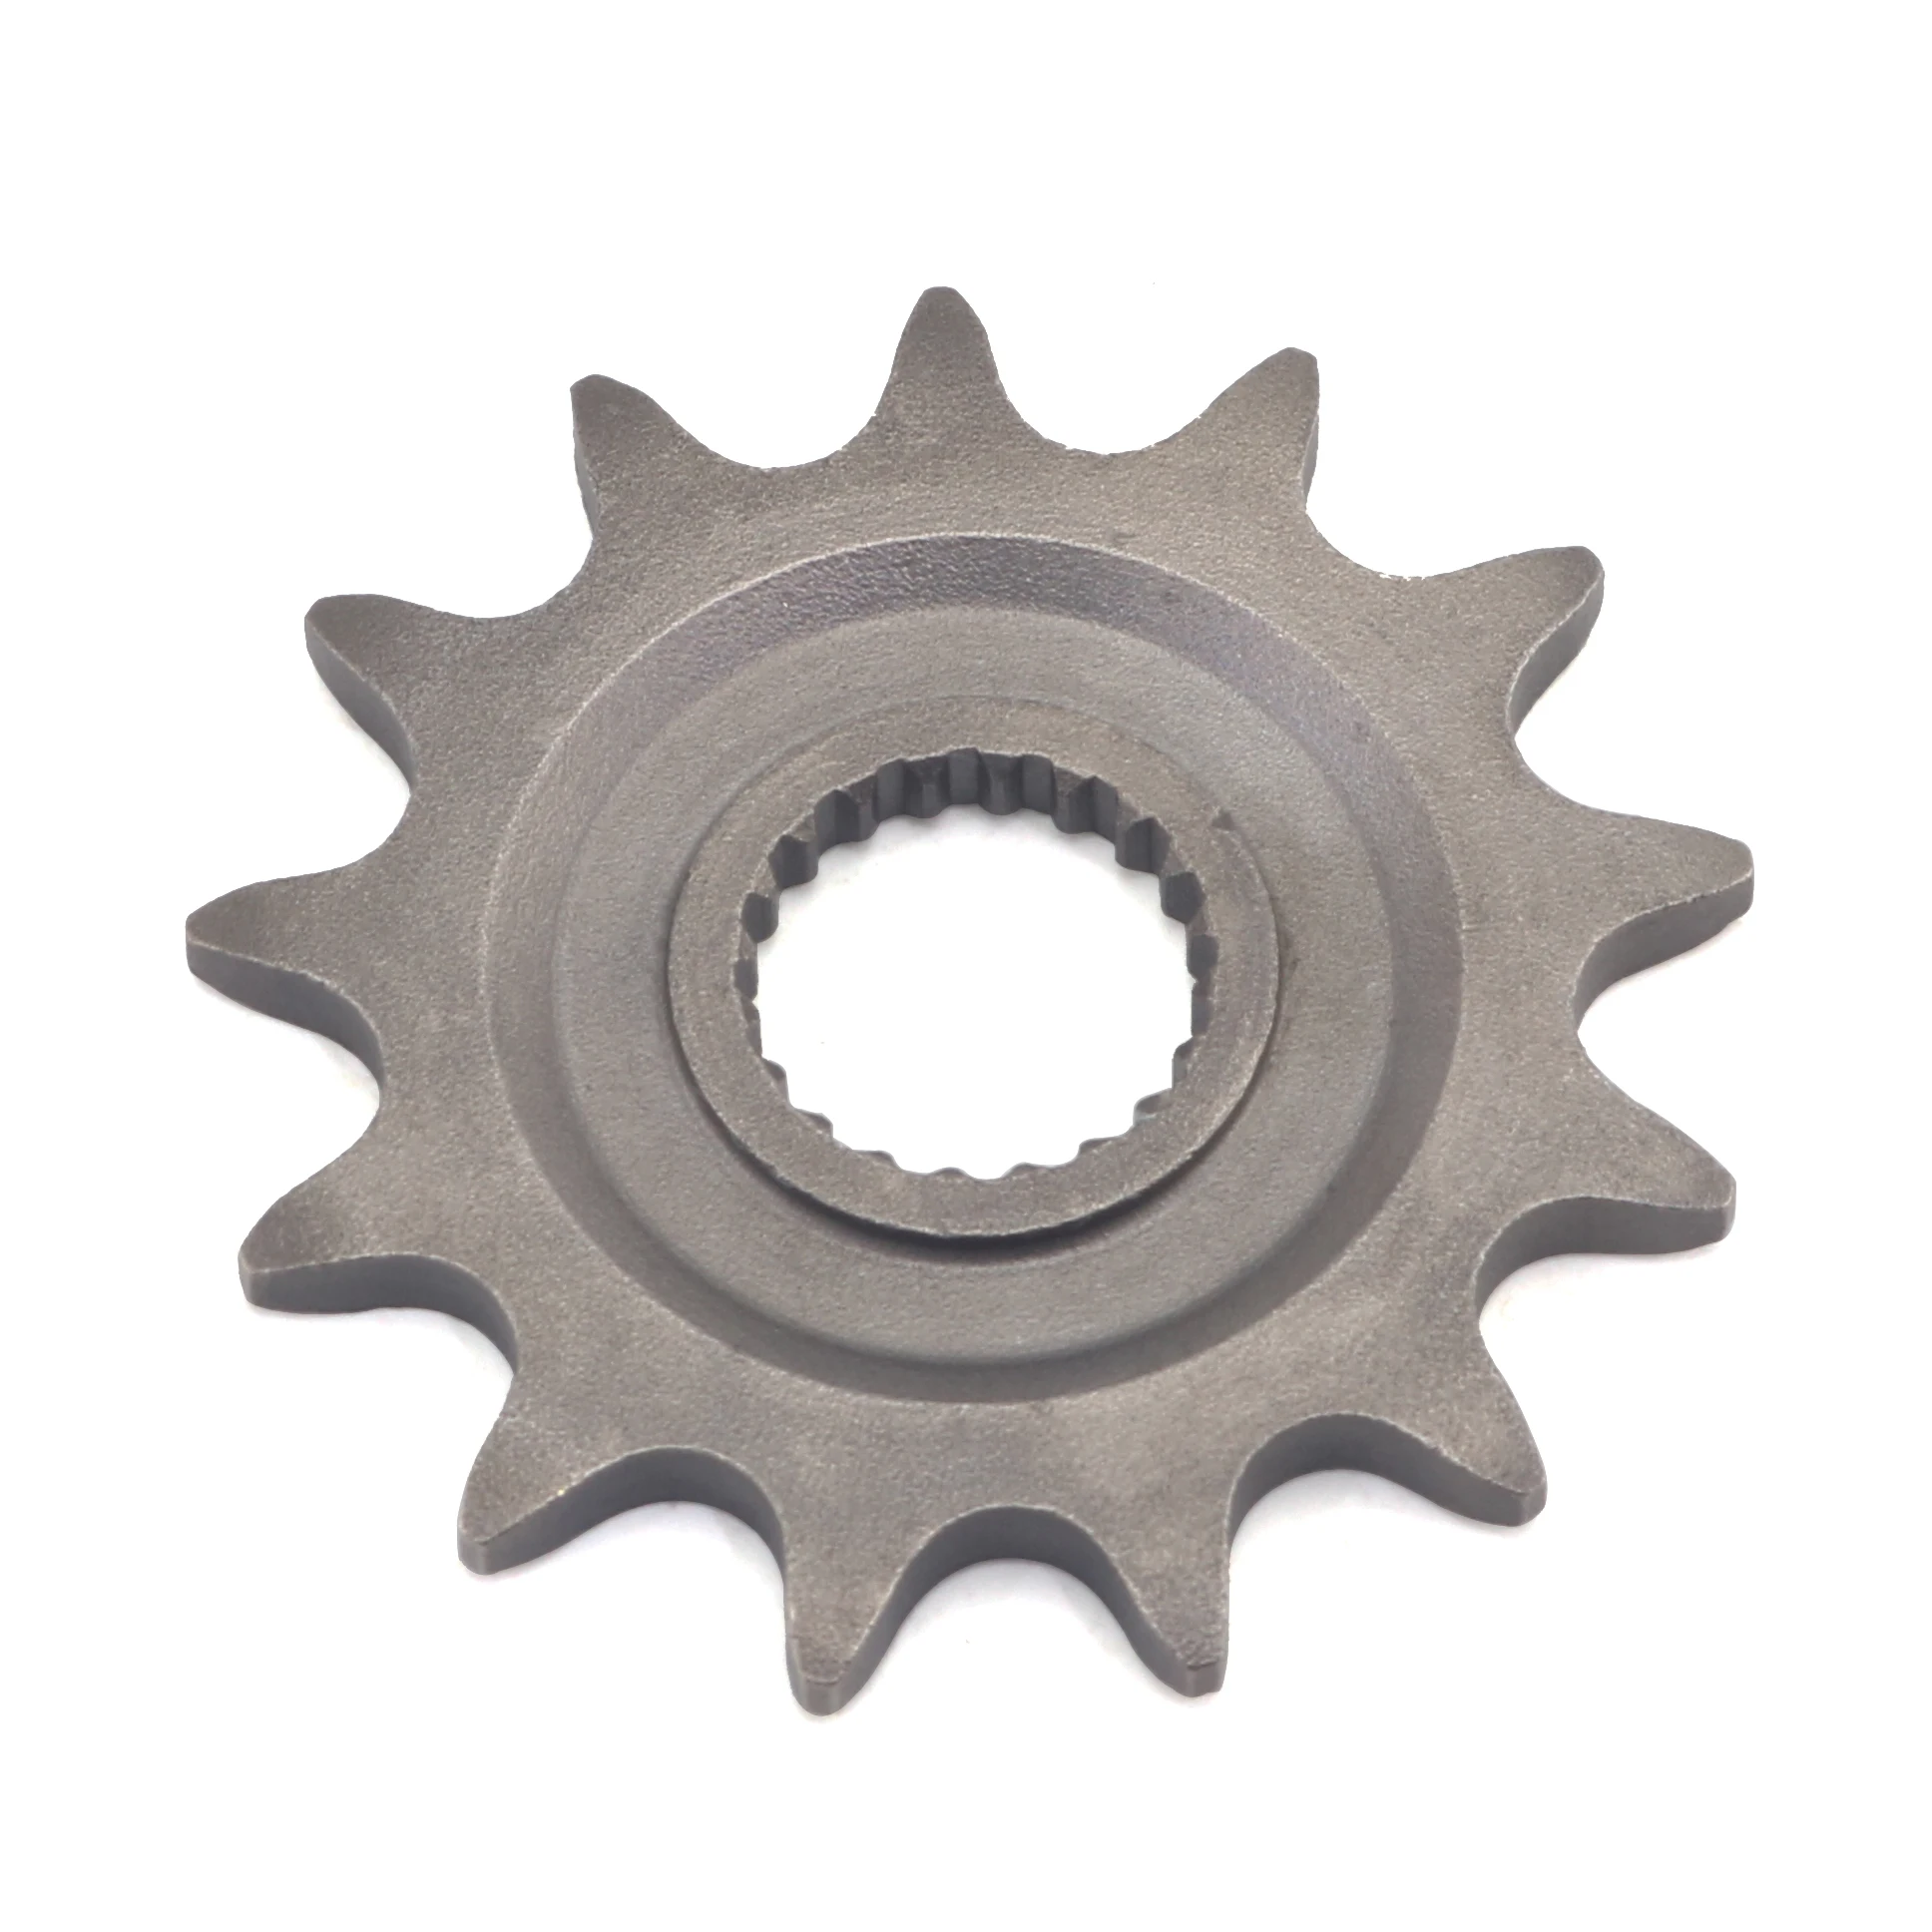 

13T 14T Front Chain Sprocket For YAMAHA YZ125 YZ125X YZ250F YZ250FX WR250F WR250R WR250X YZ YZF WR 125 250F 250R 250X Dirt Bike